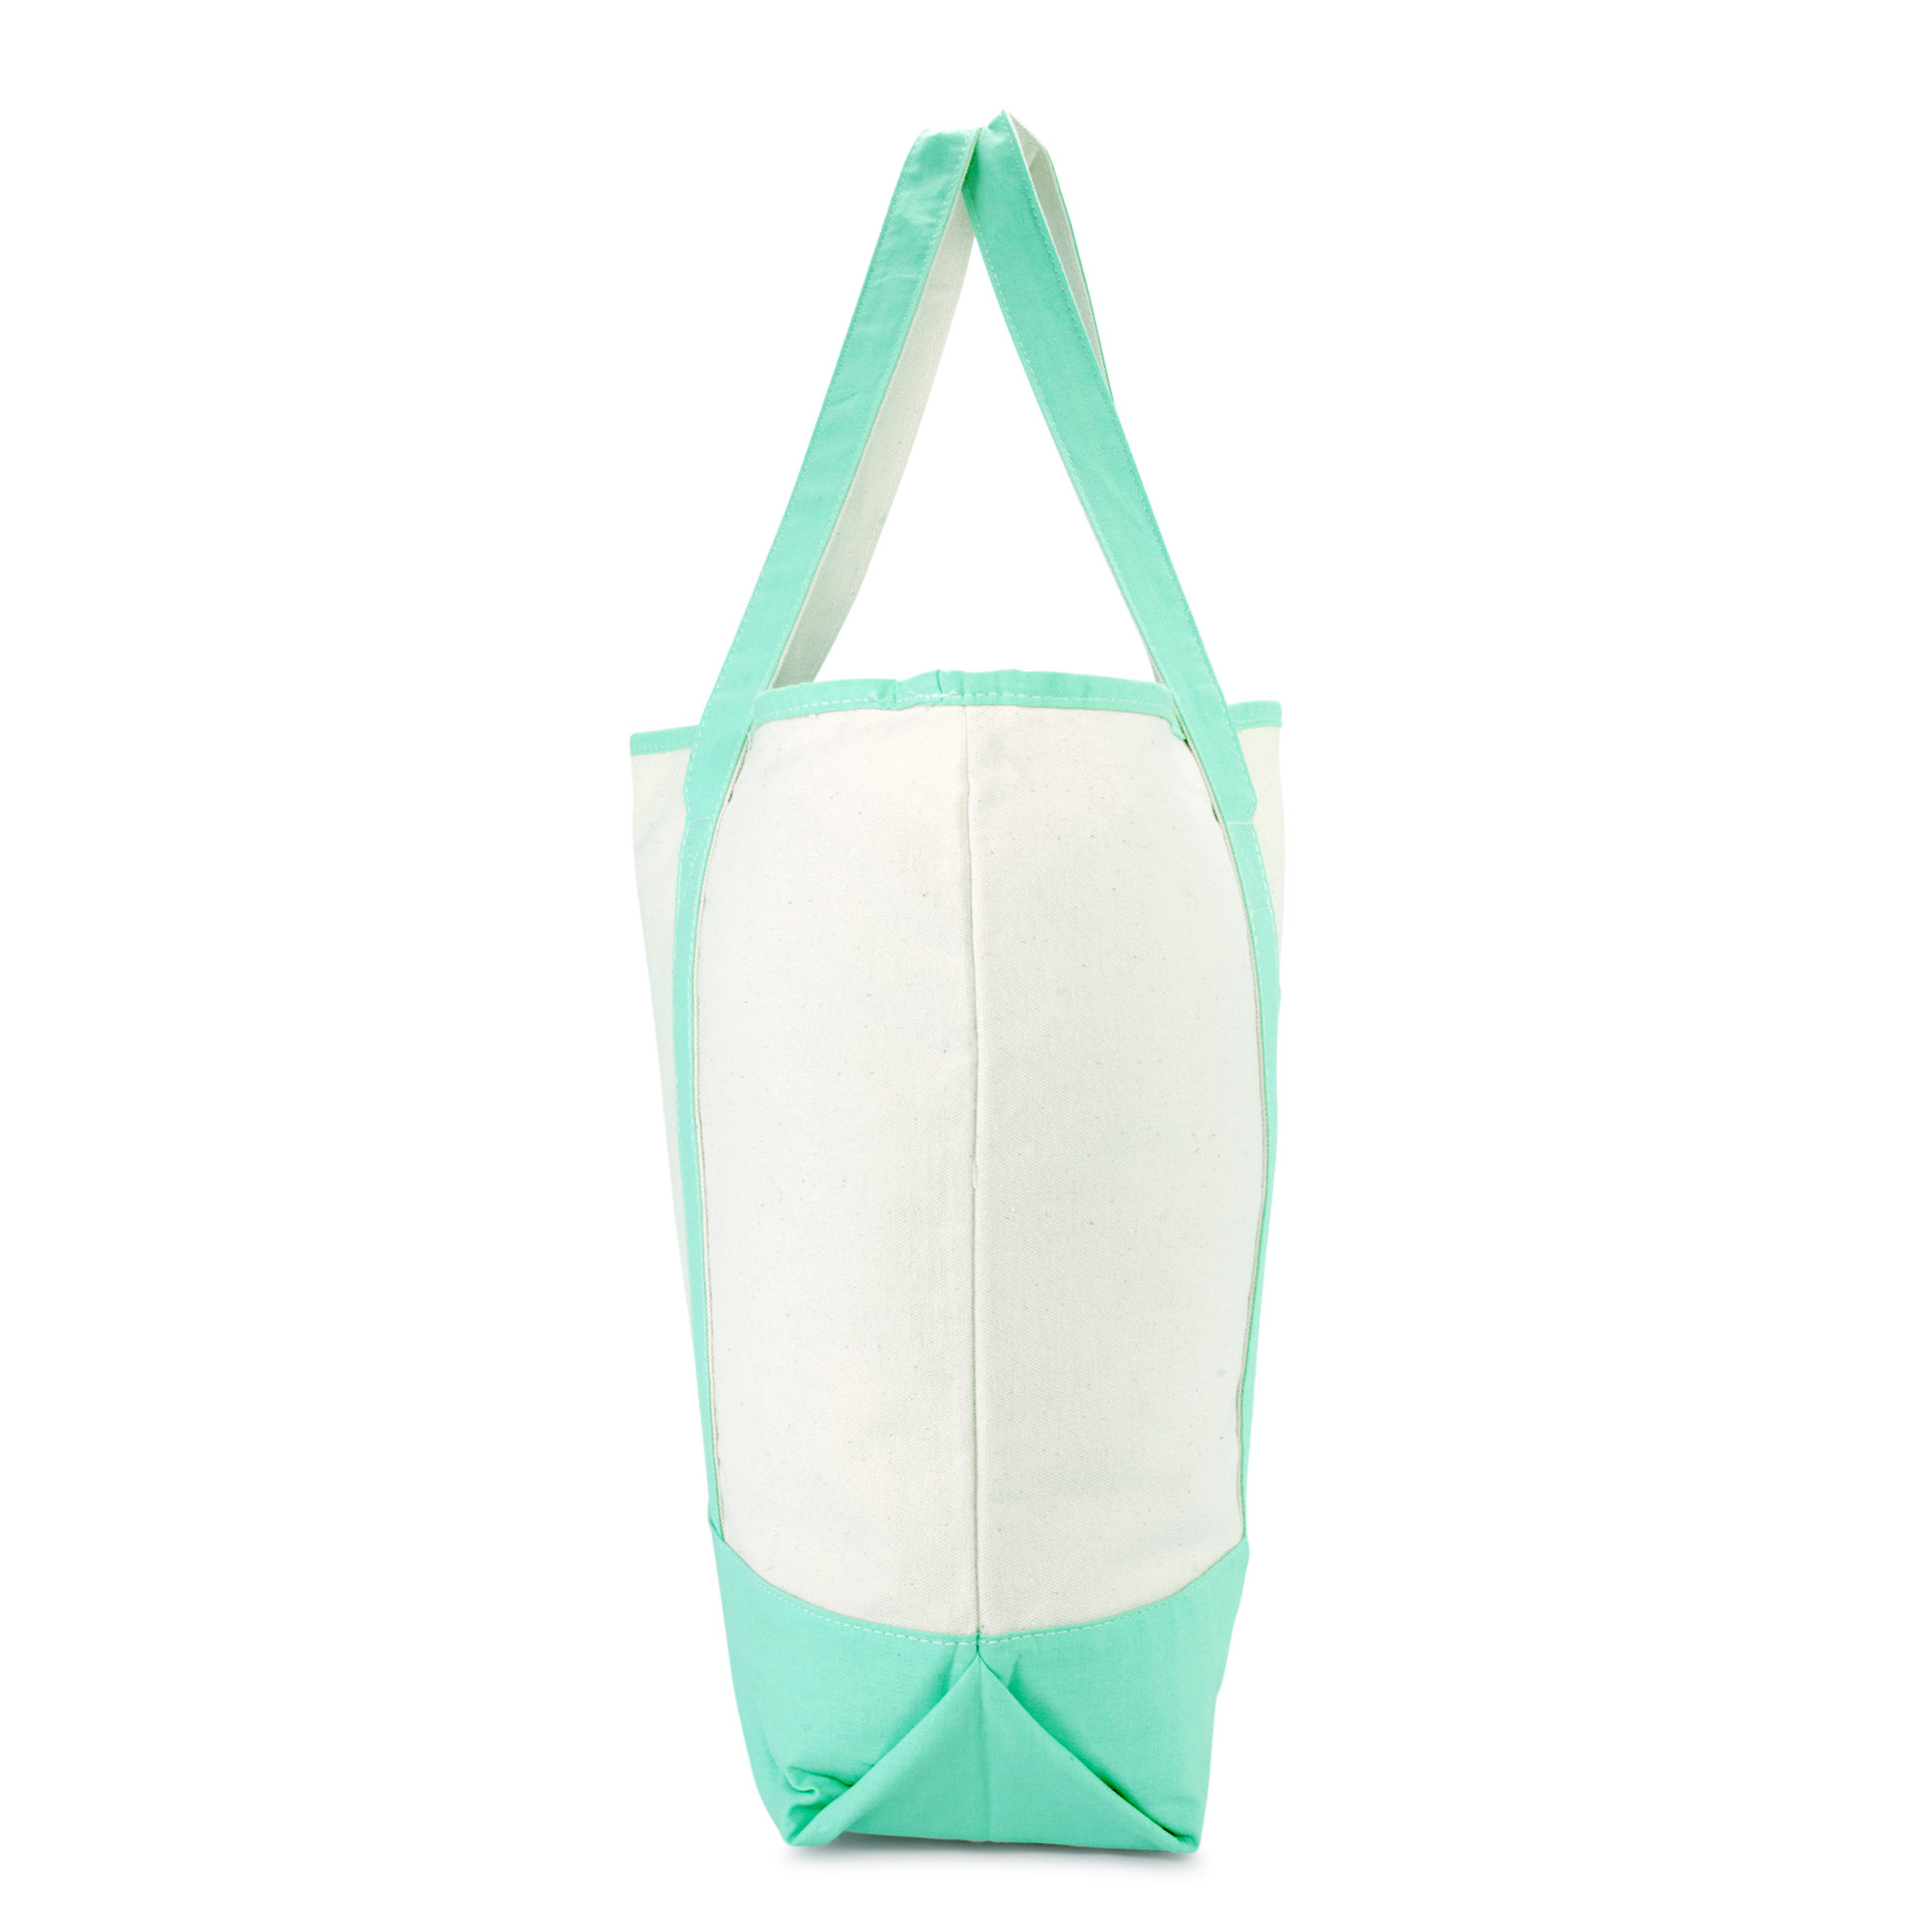 DALIX 22" Open Top Deluxe Tote Bag with Outer Pocket in Mint Green - image 5 of 5